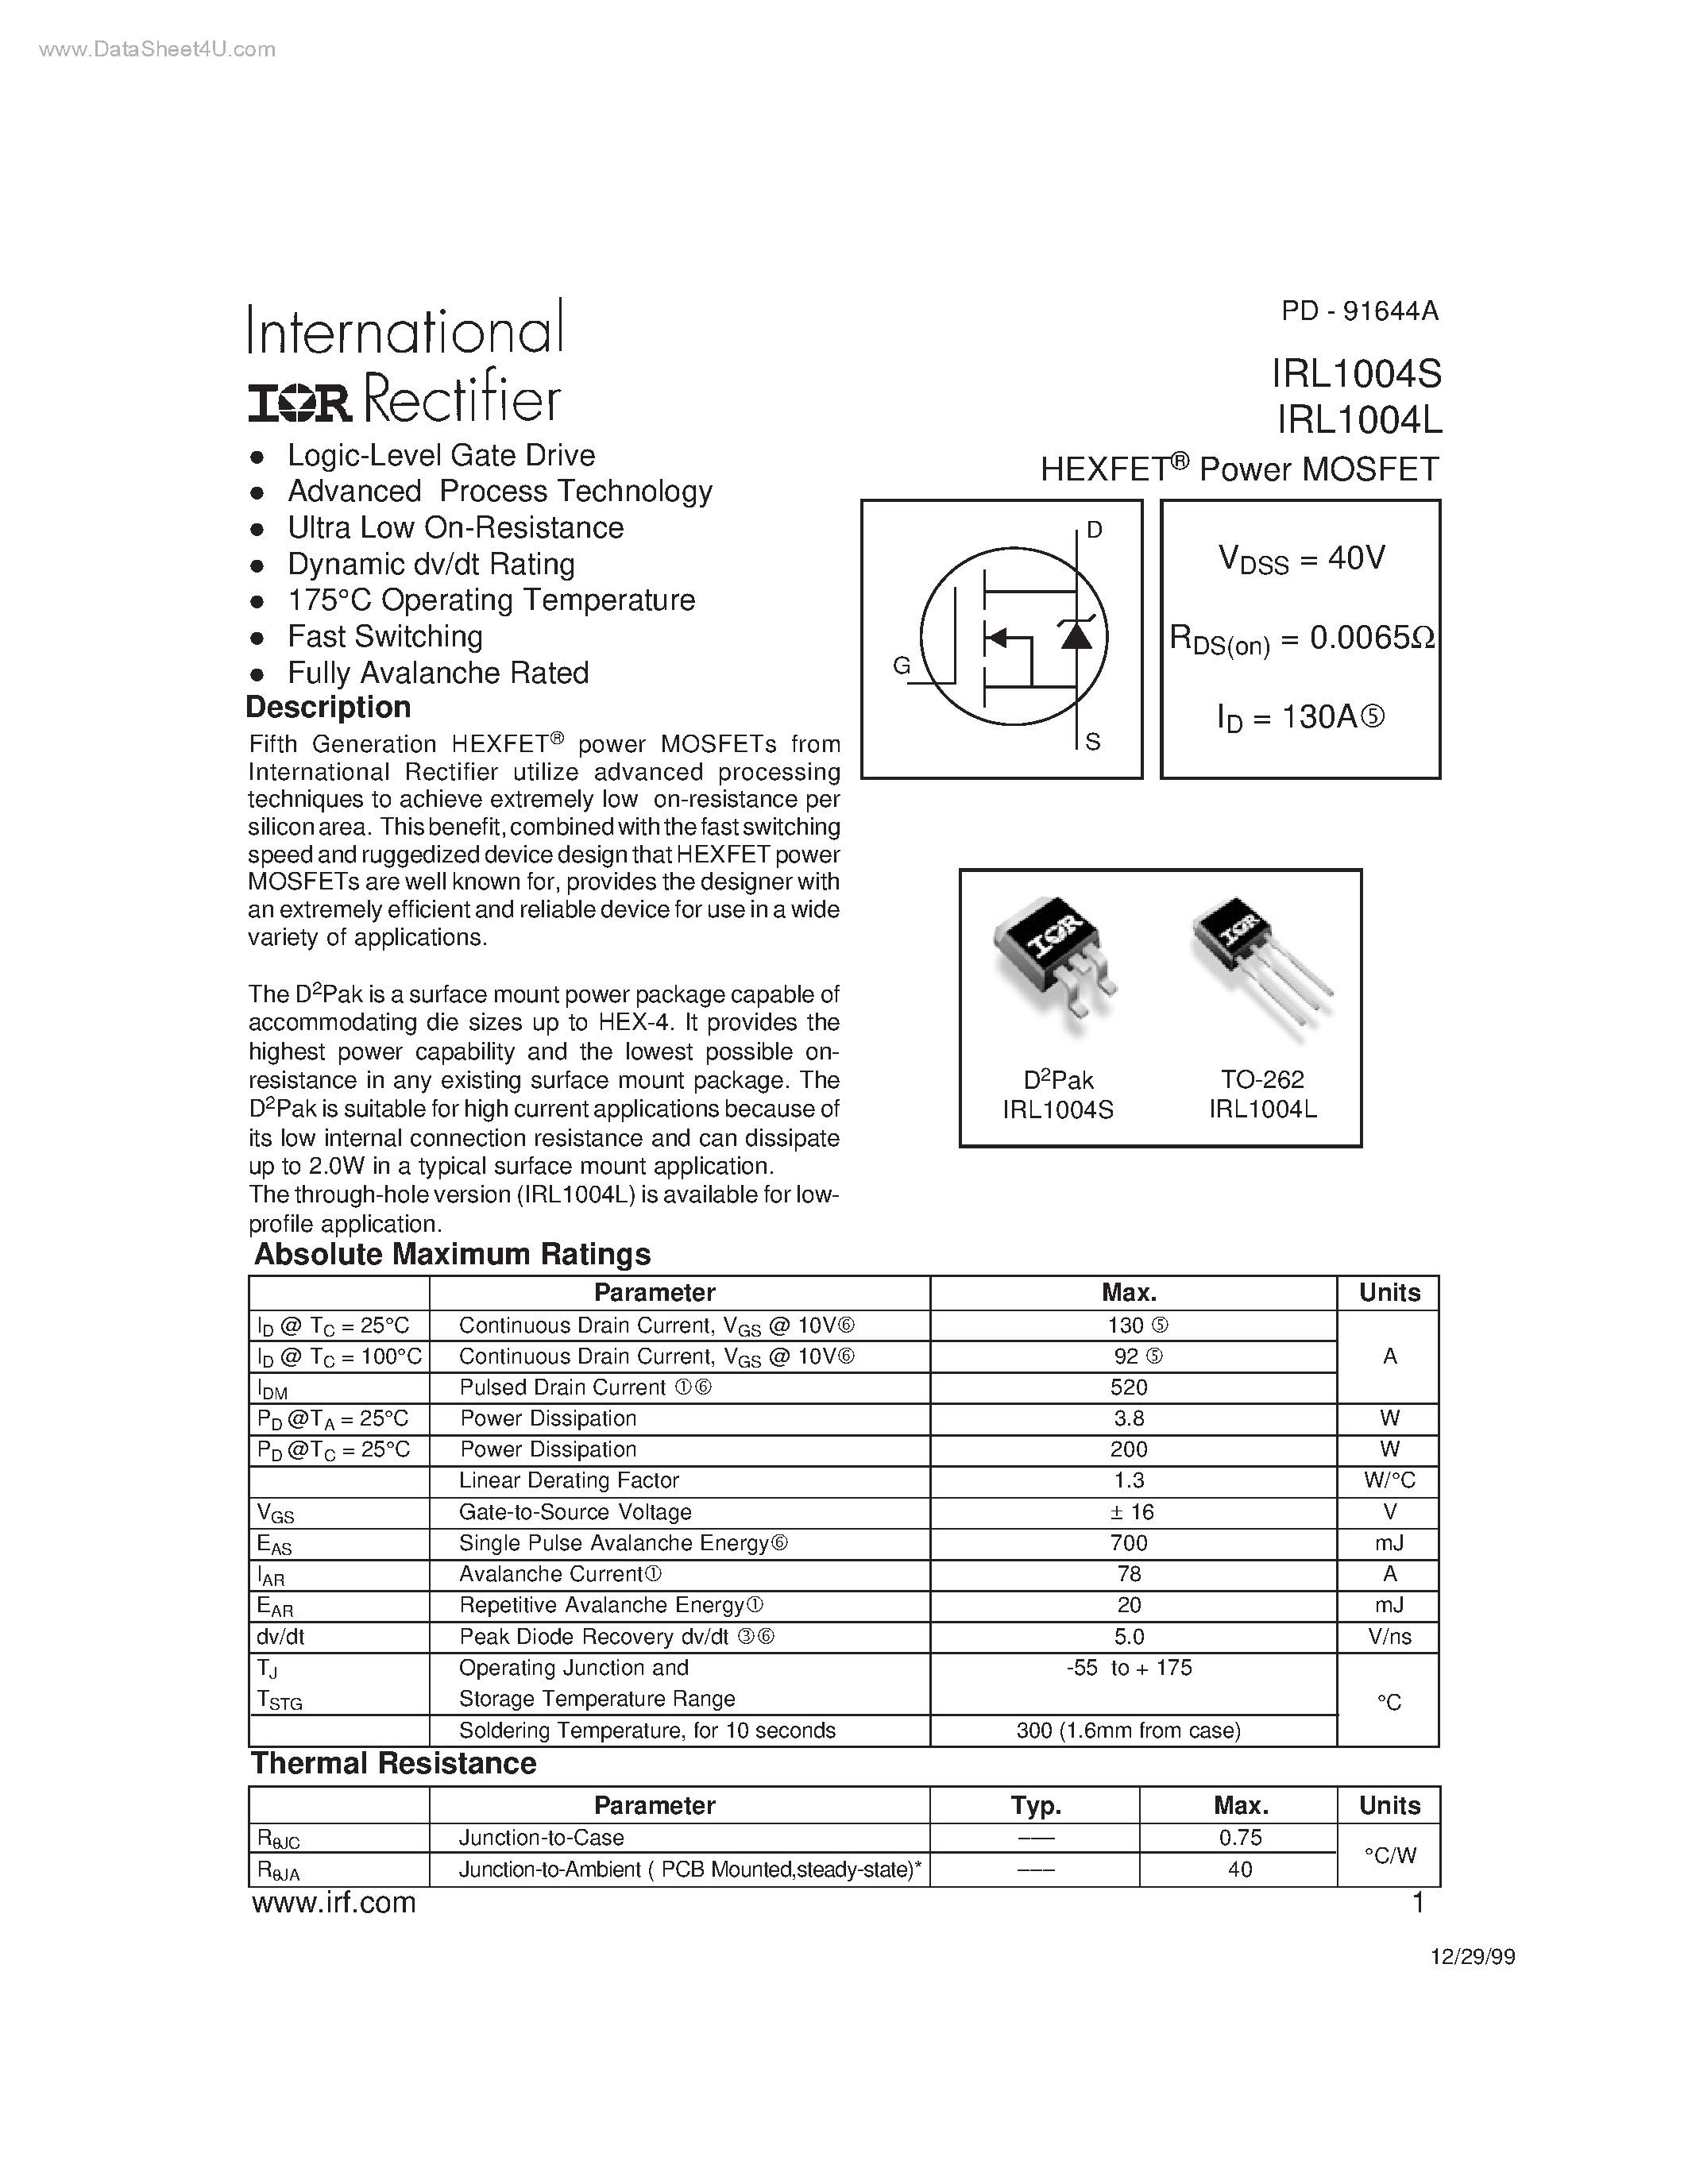 Datasheet IRL1004L - HEXFET Power MOSFET page 1